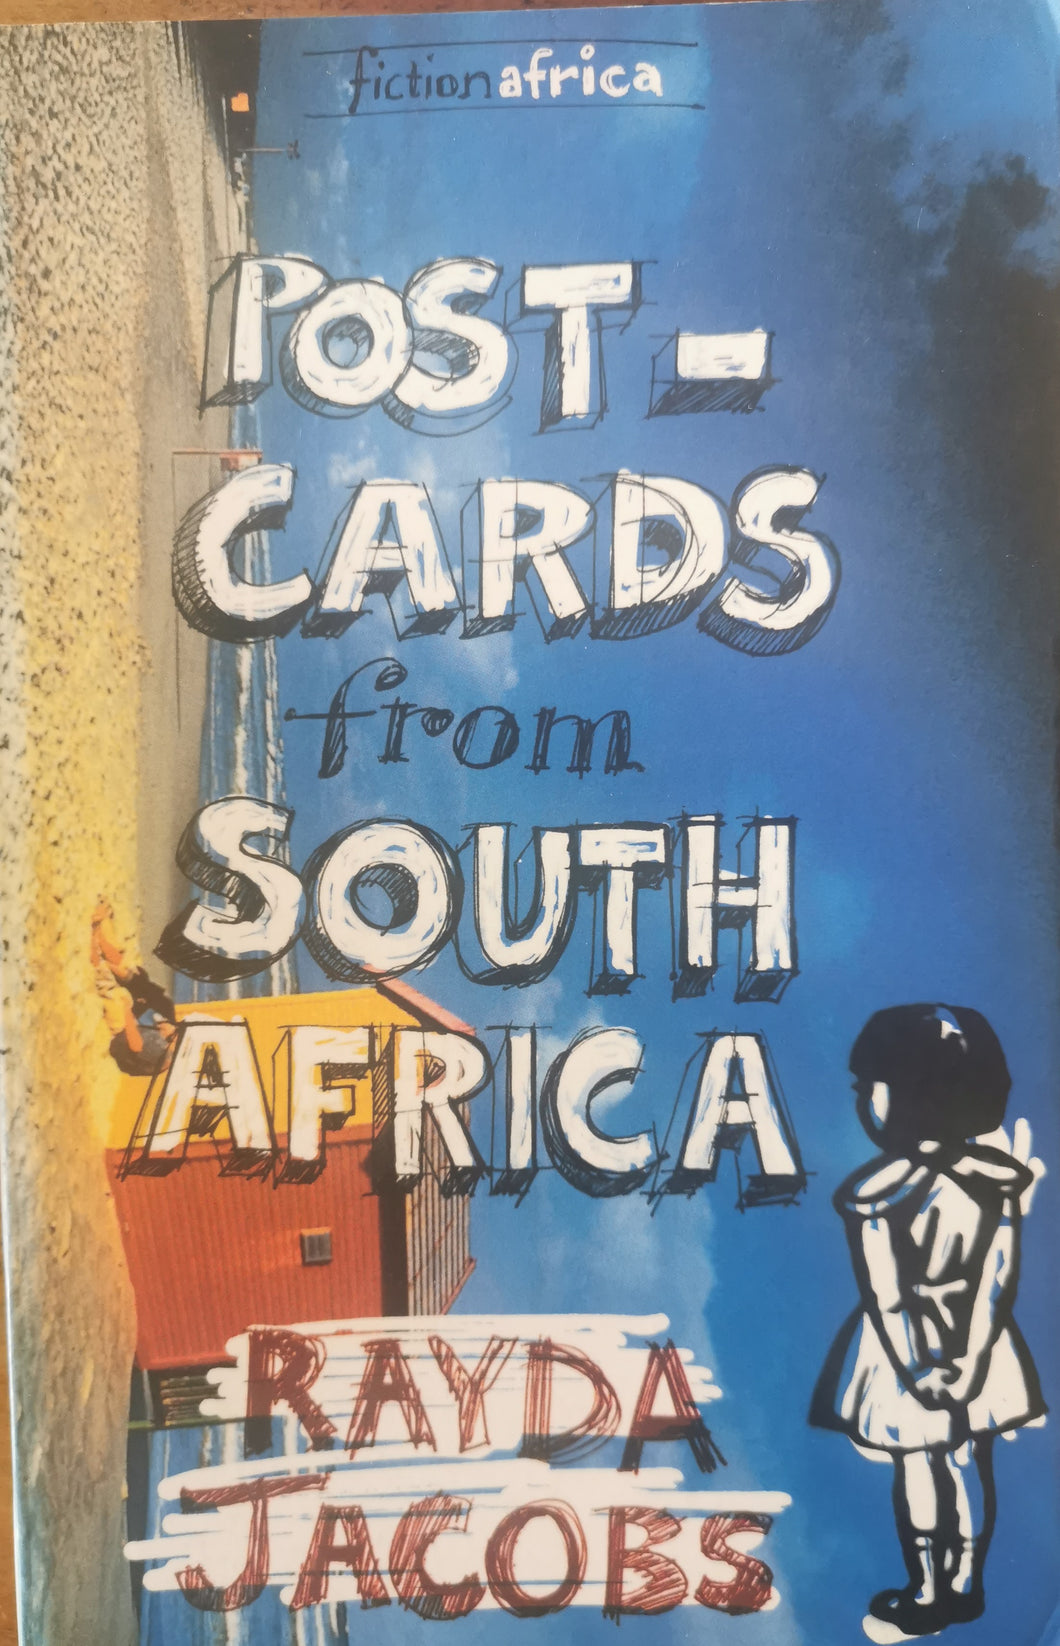 Rayda Jacobs - Post-cards from South Africa